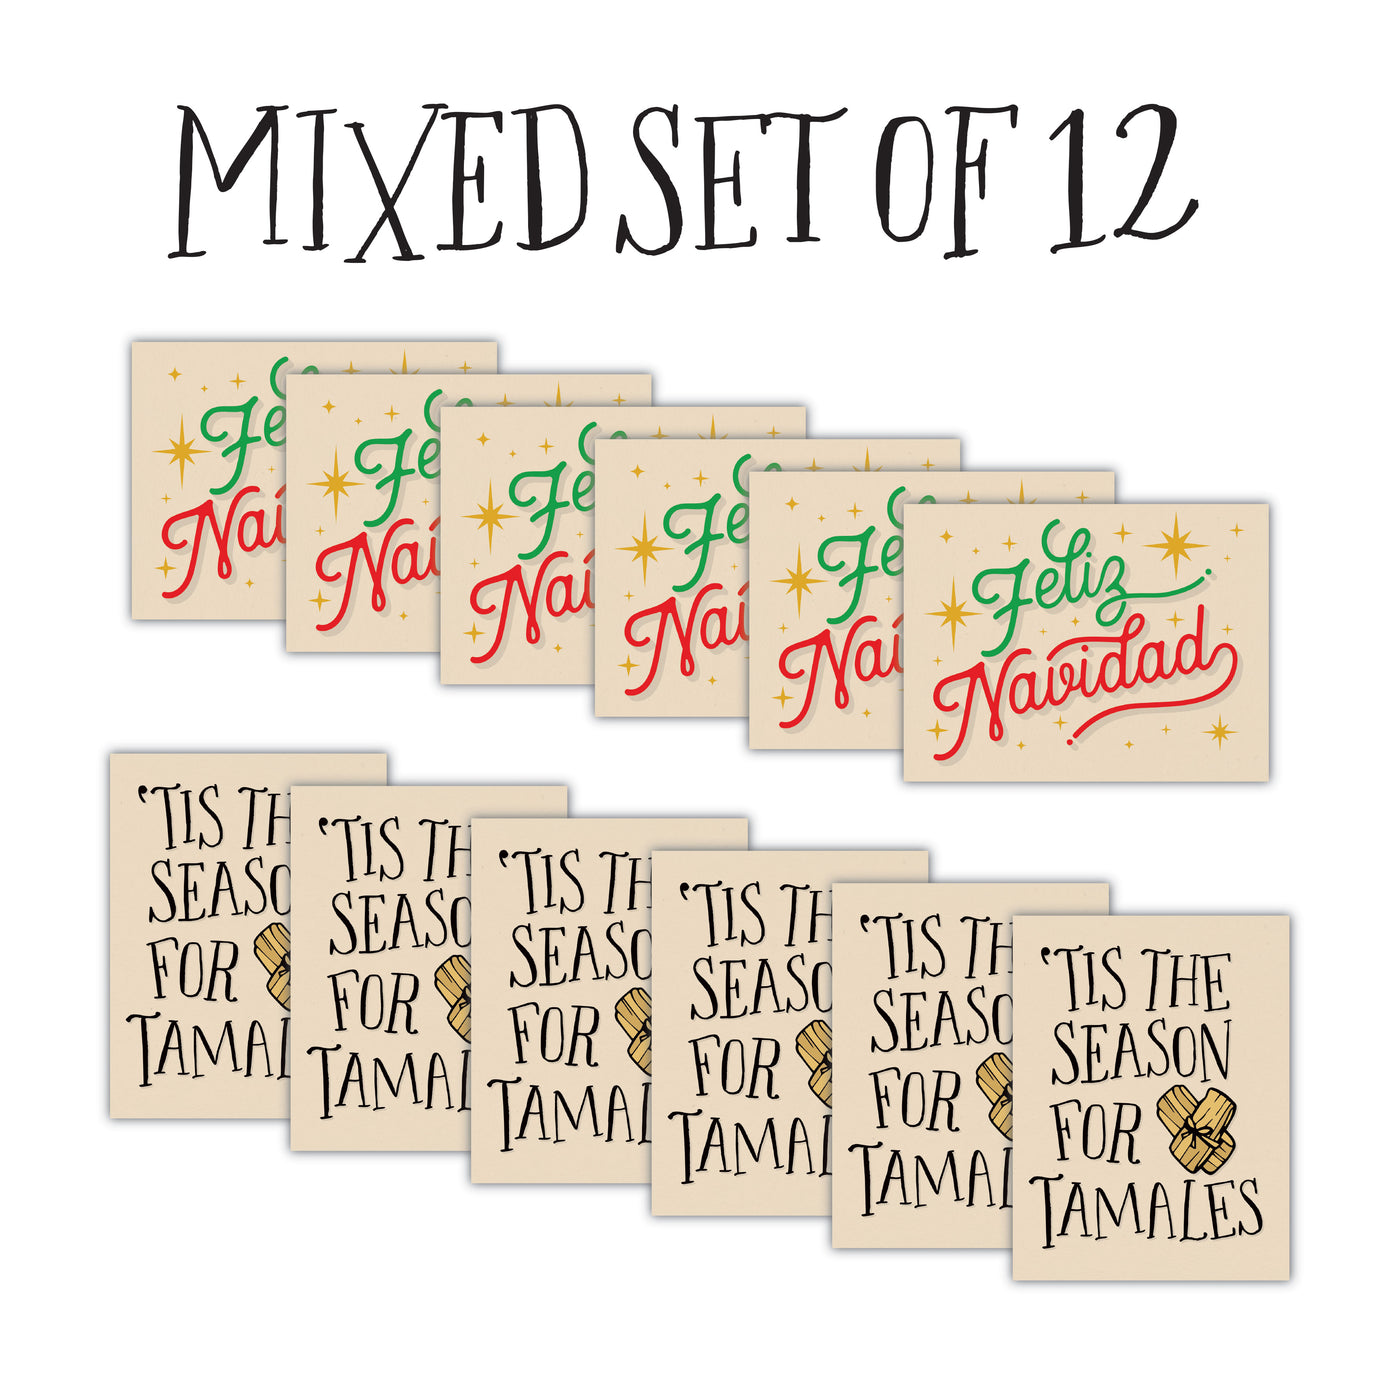 Front of 6 greeting cards with beige background, gold stars, red & green text that reads "Feliz Navidad", and front of 6 greeting cards with beige background & black text that reads "'Tis The Season For Tamales"